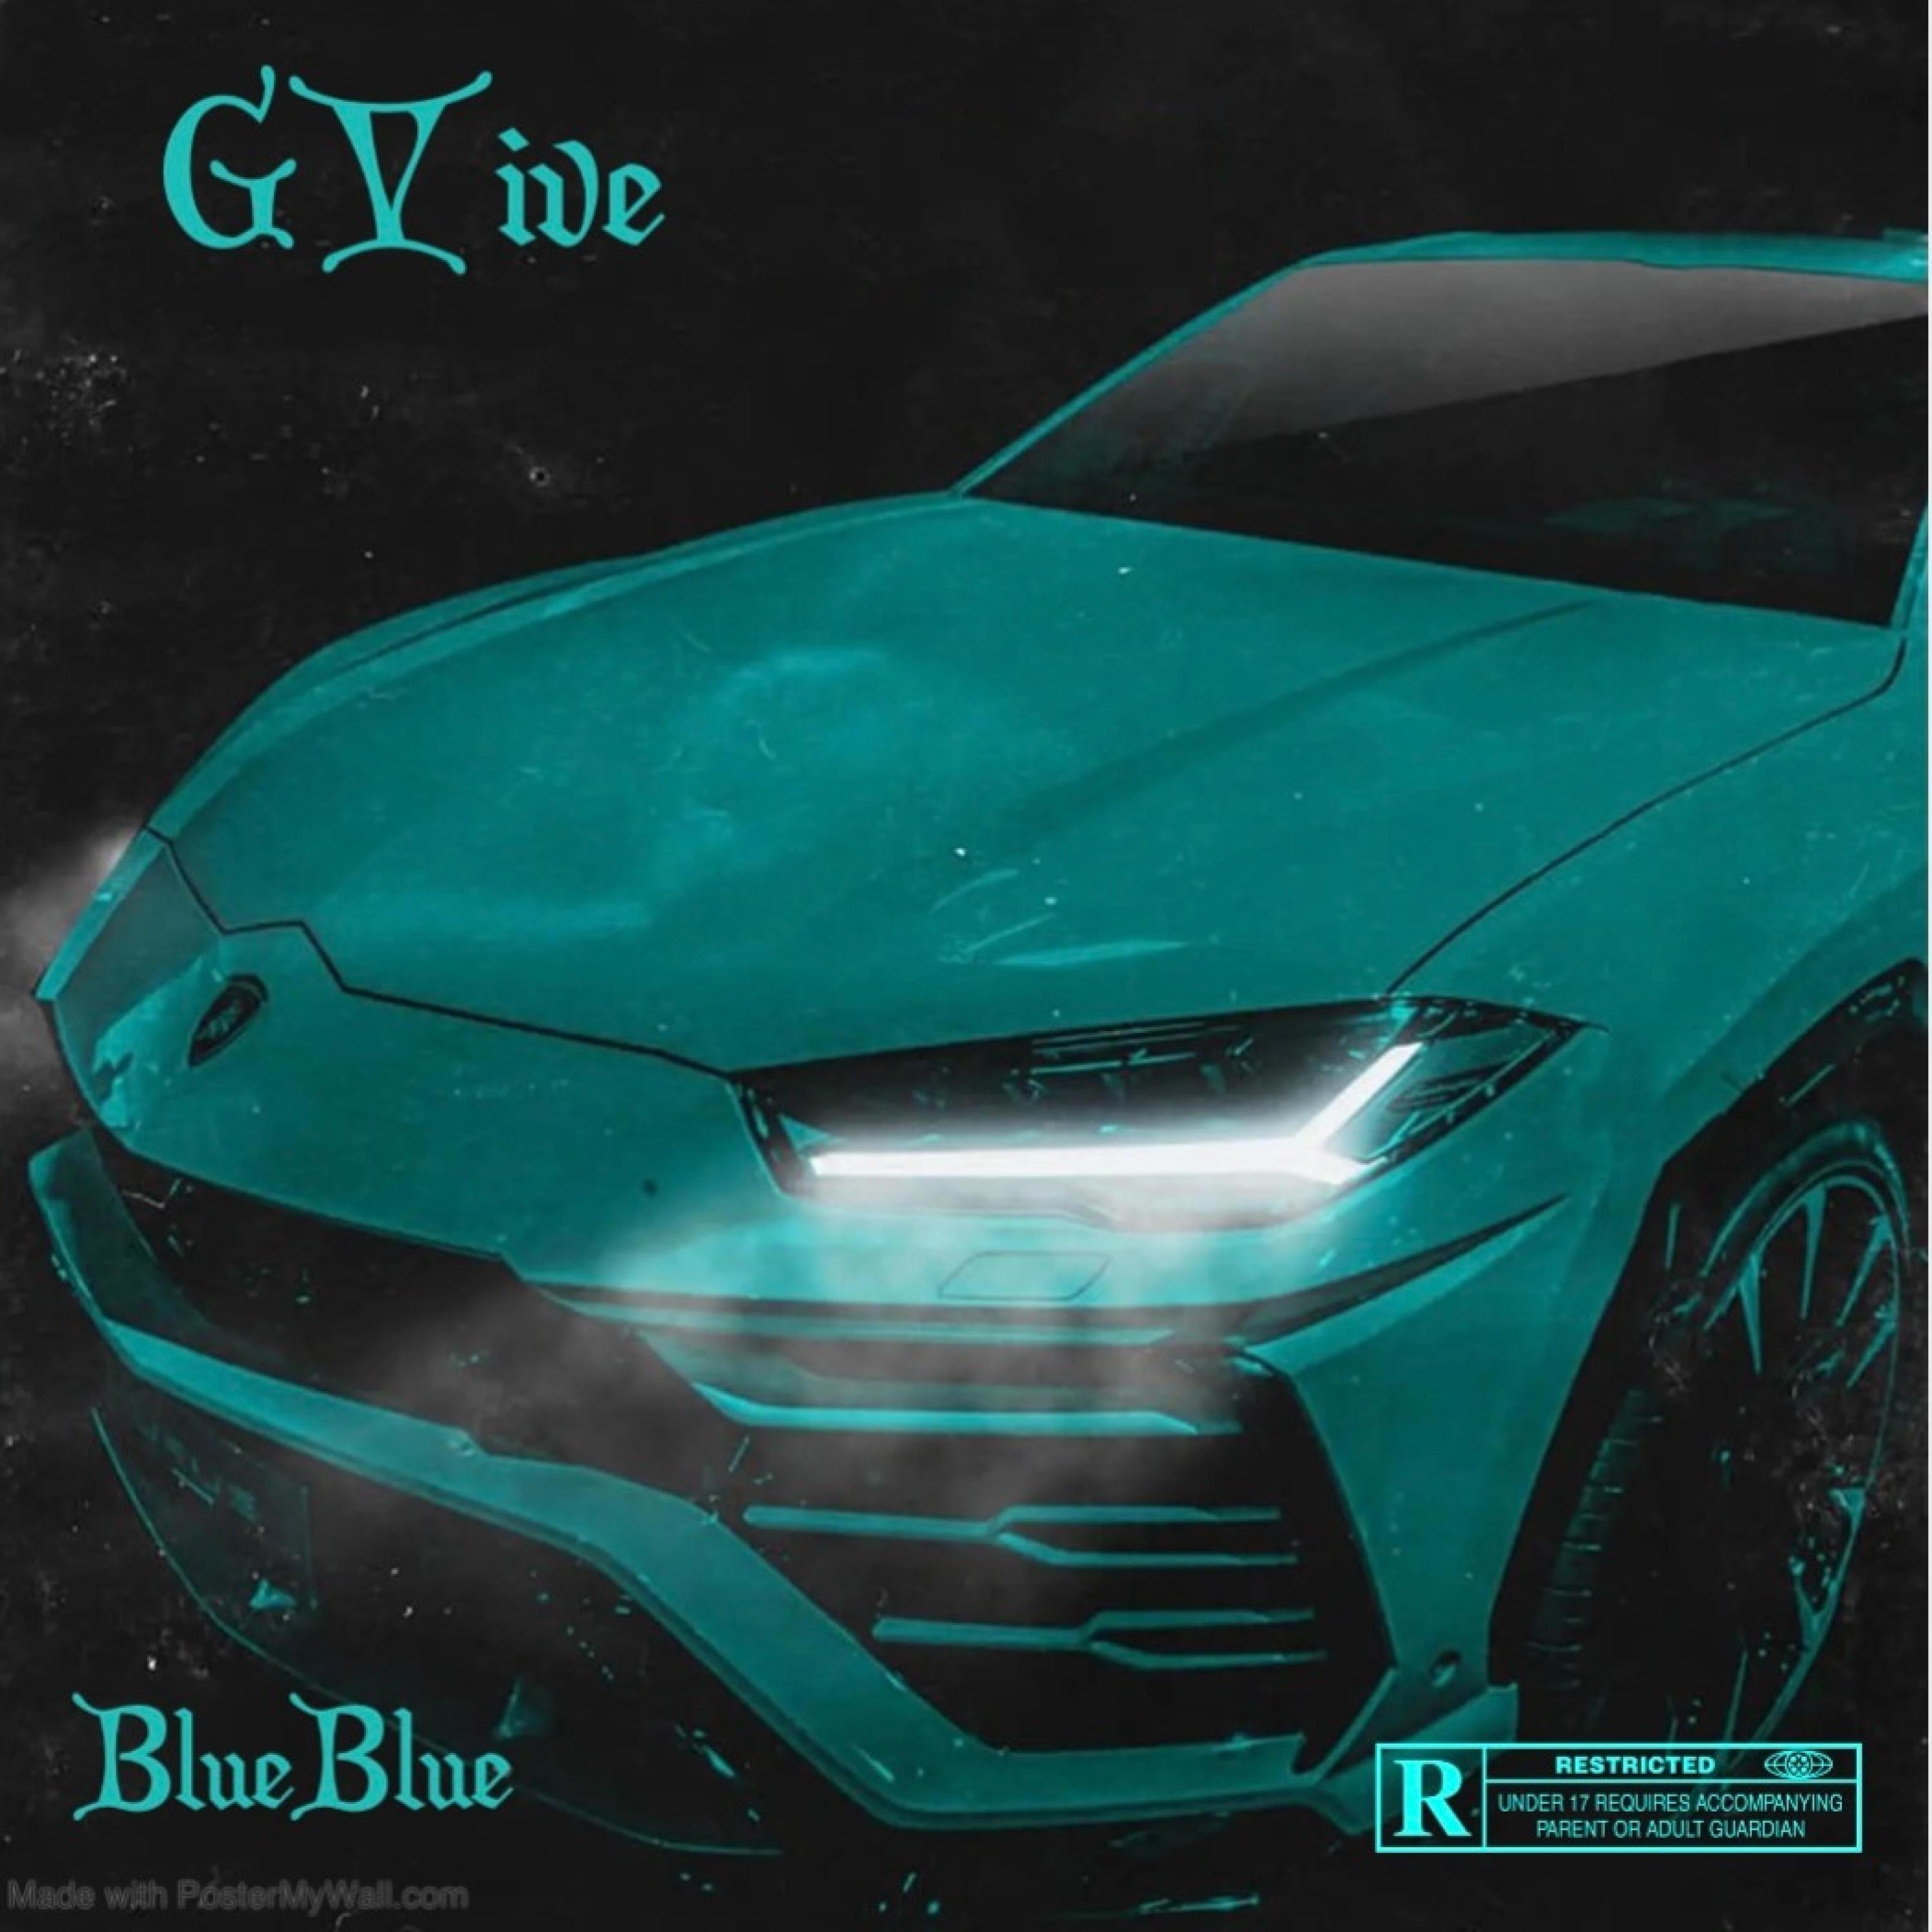 G5IVE - Baby blue